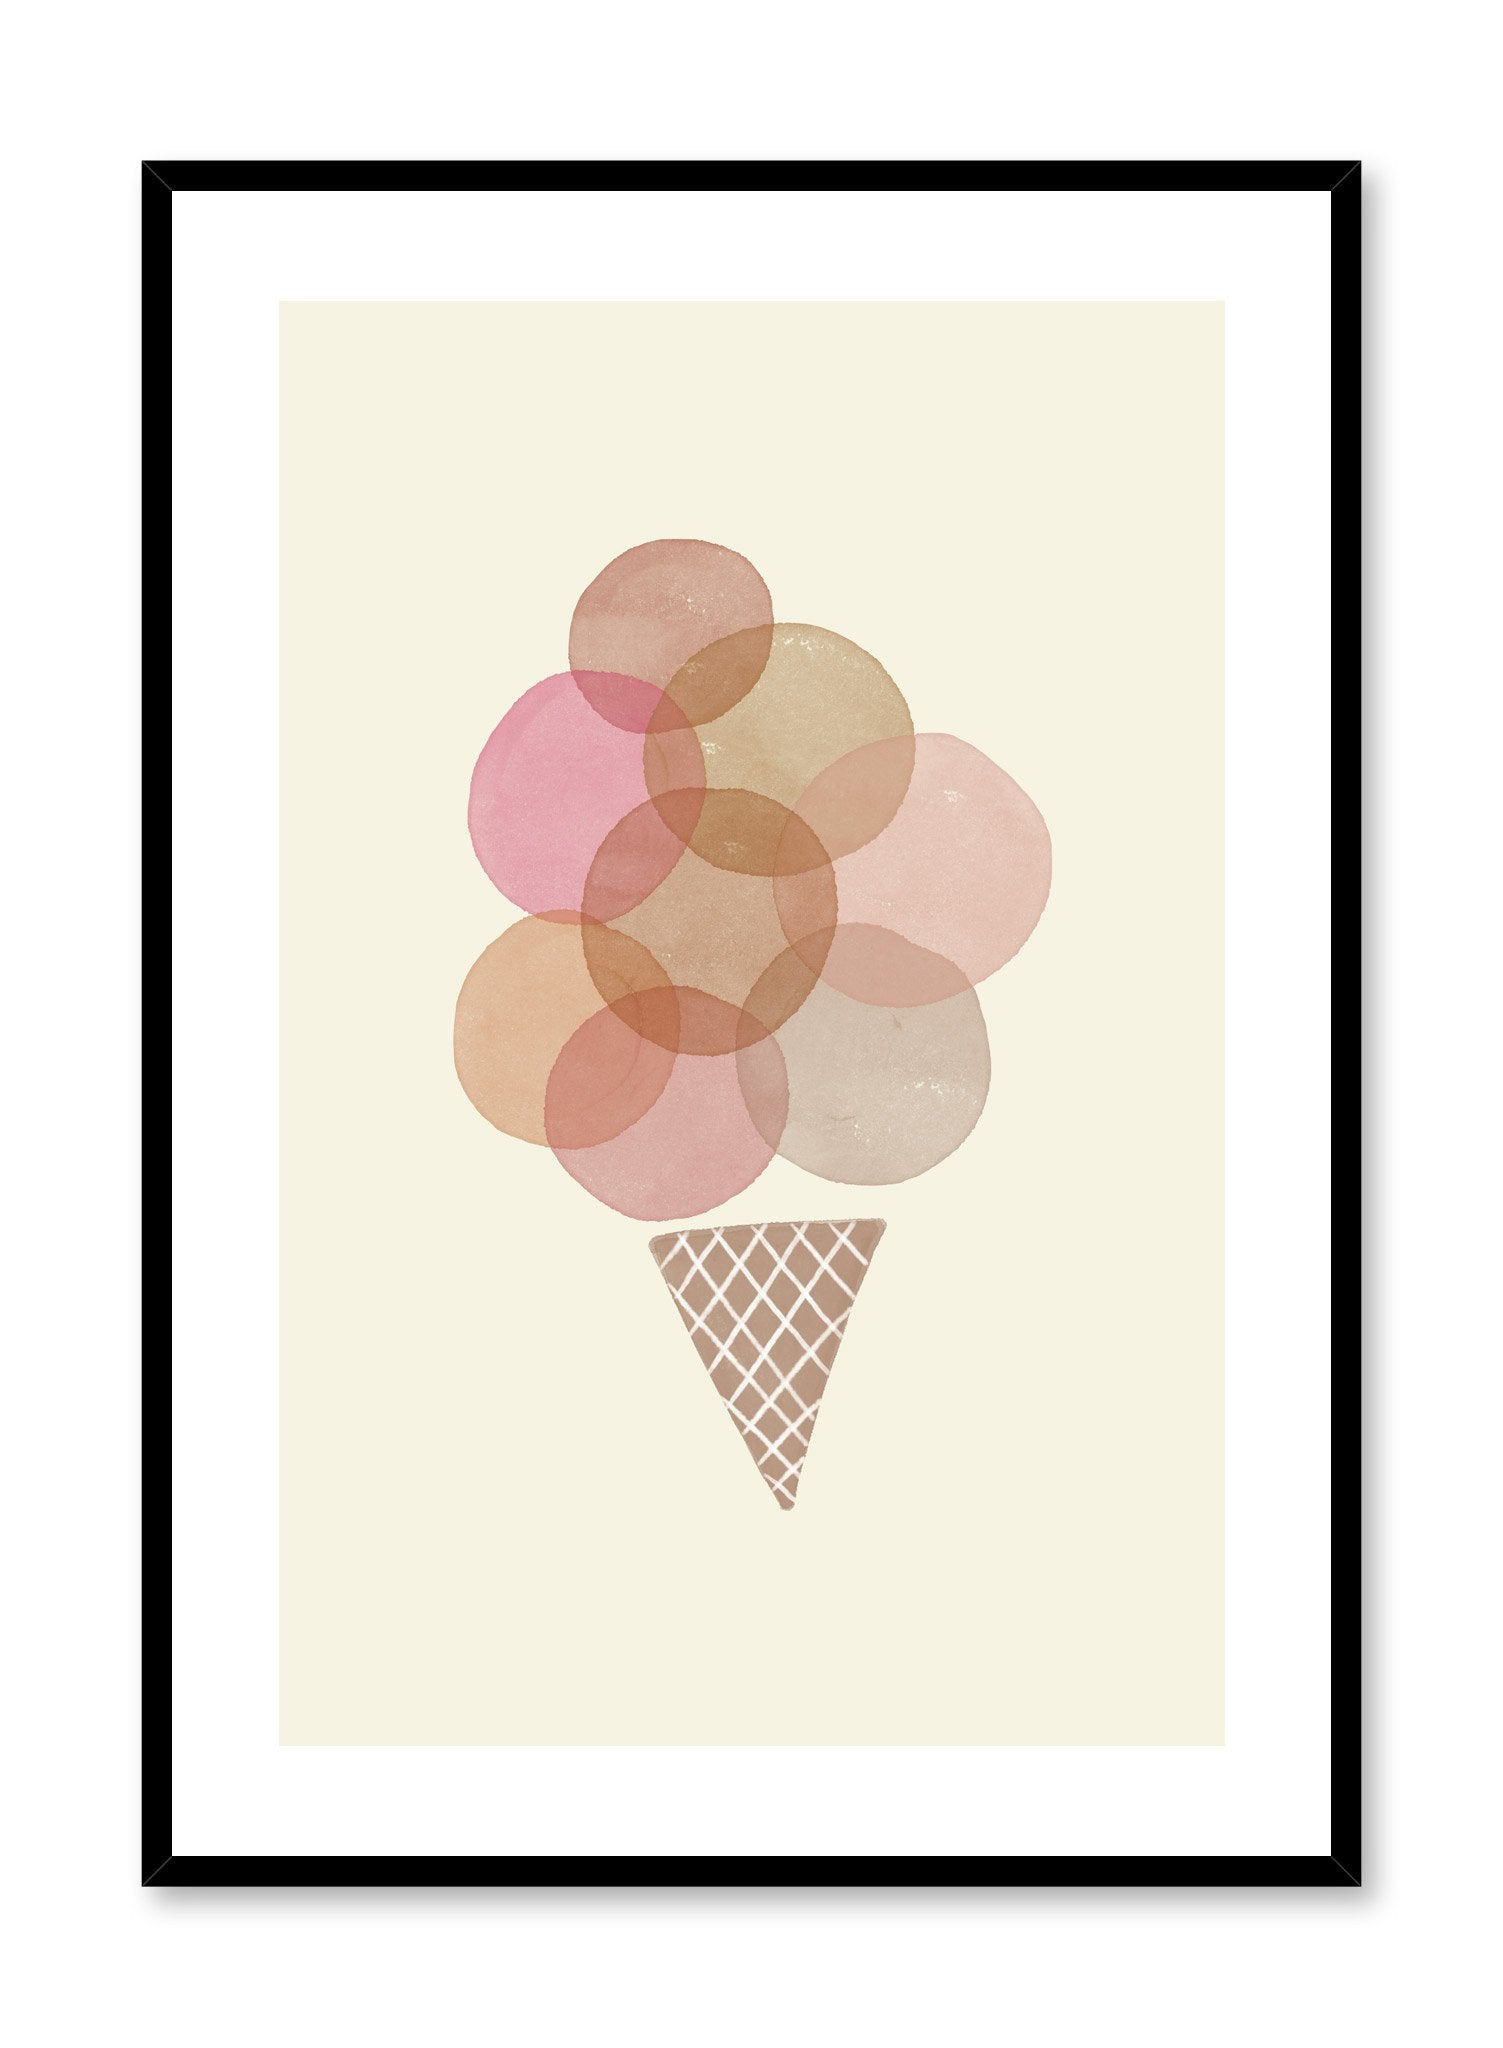 Kids nursery poster by Opposite Wall with watercolour illustration of ice cream cone